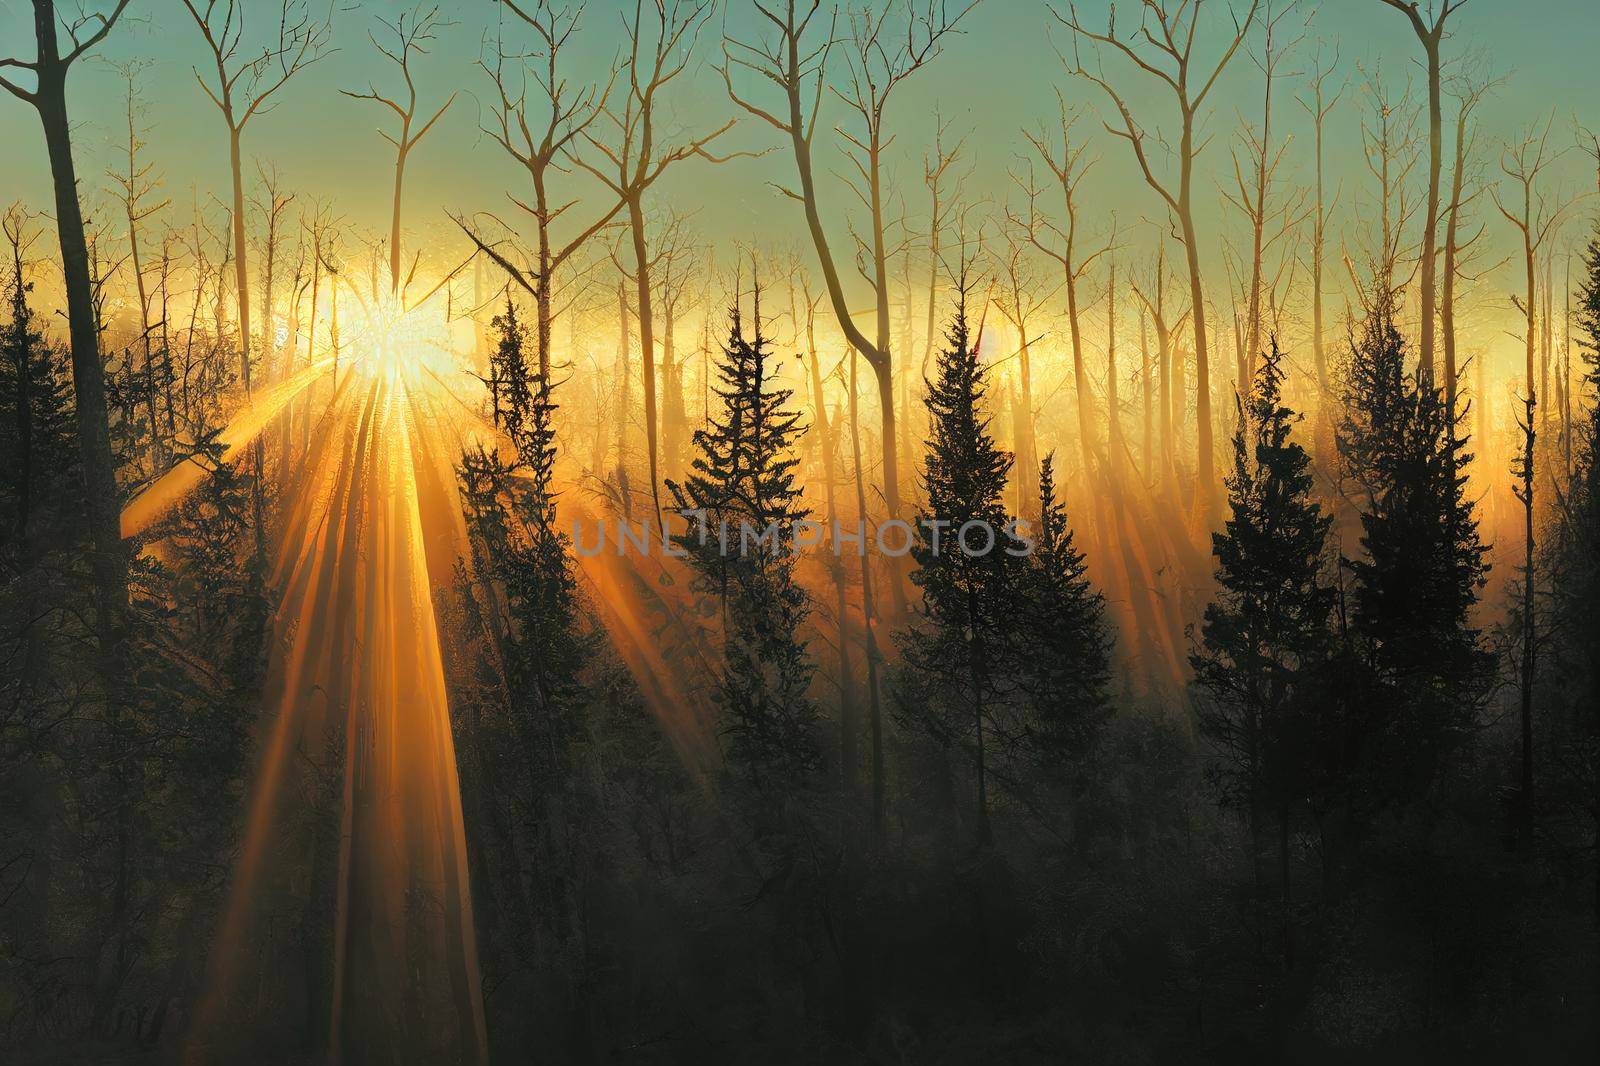 Forest Trees with Sunlight Pouring through at Sunset in by 2ragon